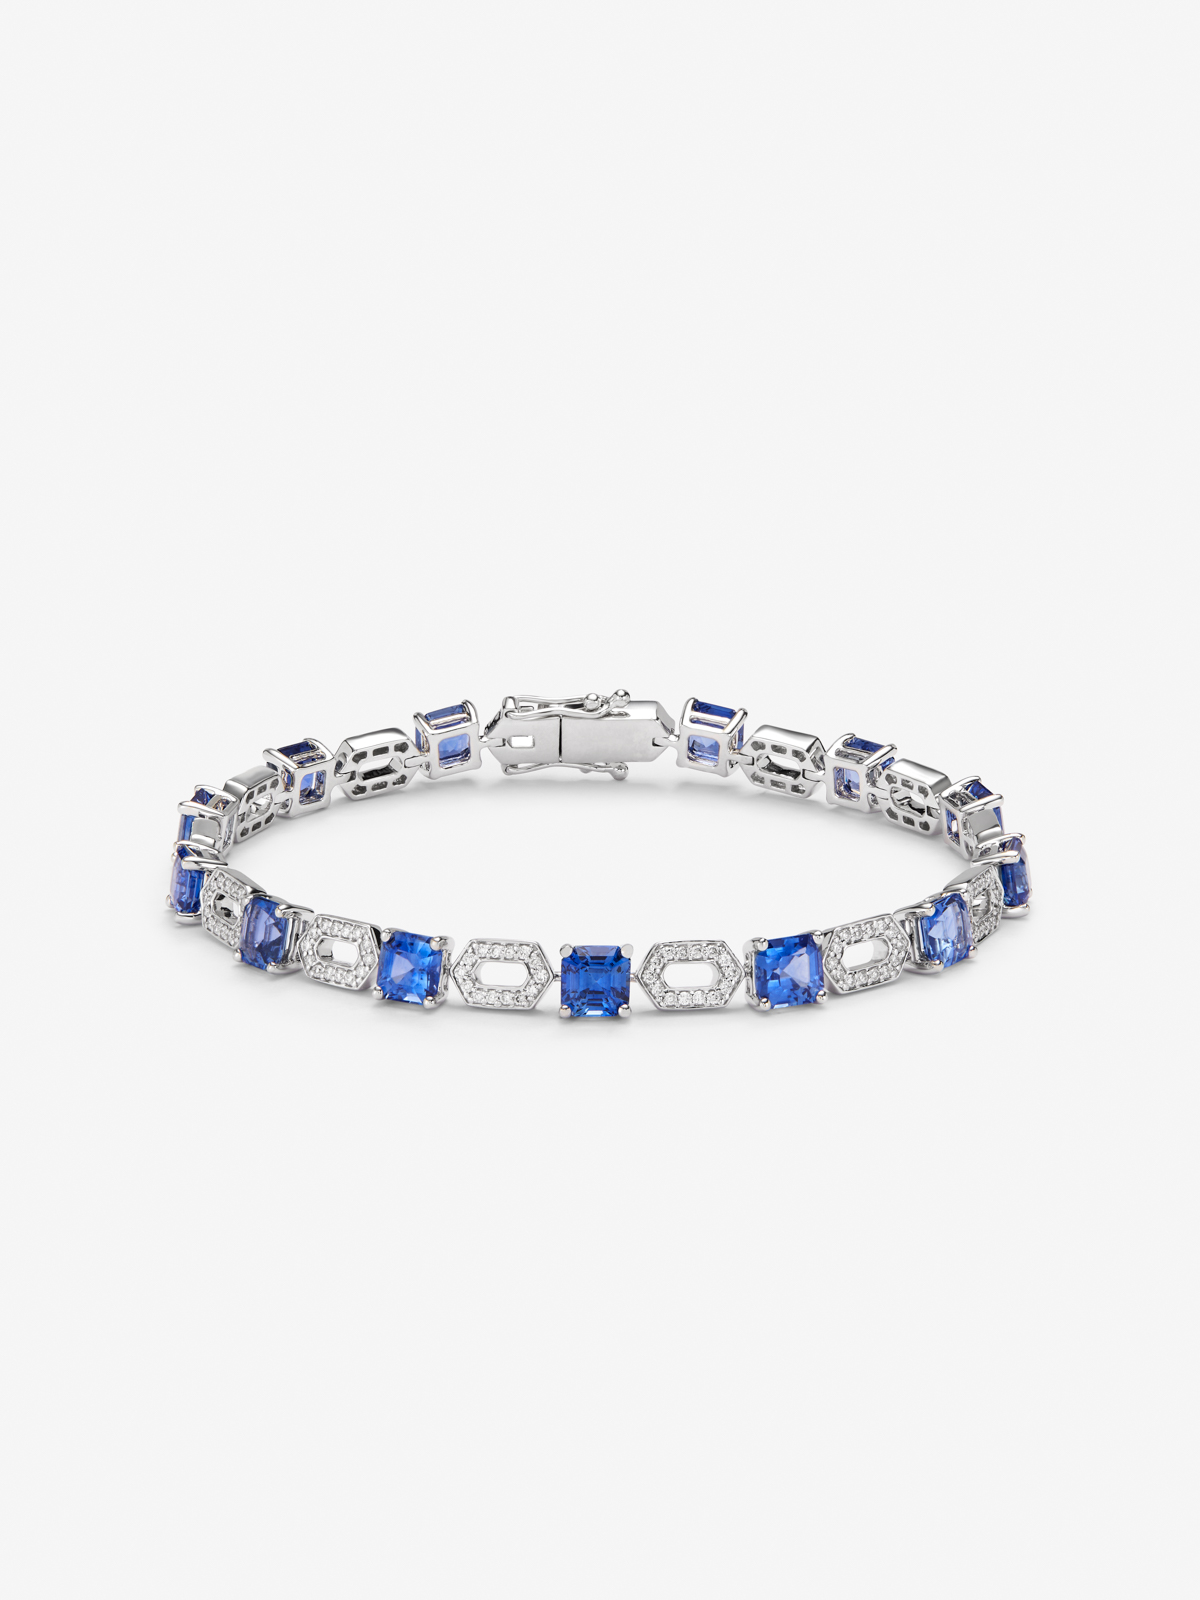 18K White Gold Bracelet with blue sapphiros in octagonal size of 9.37 cts and white diamonds in bright size of 0.69 cts